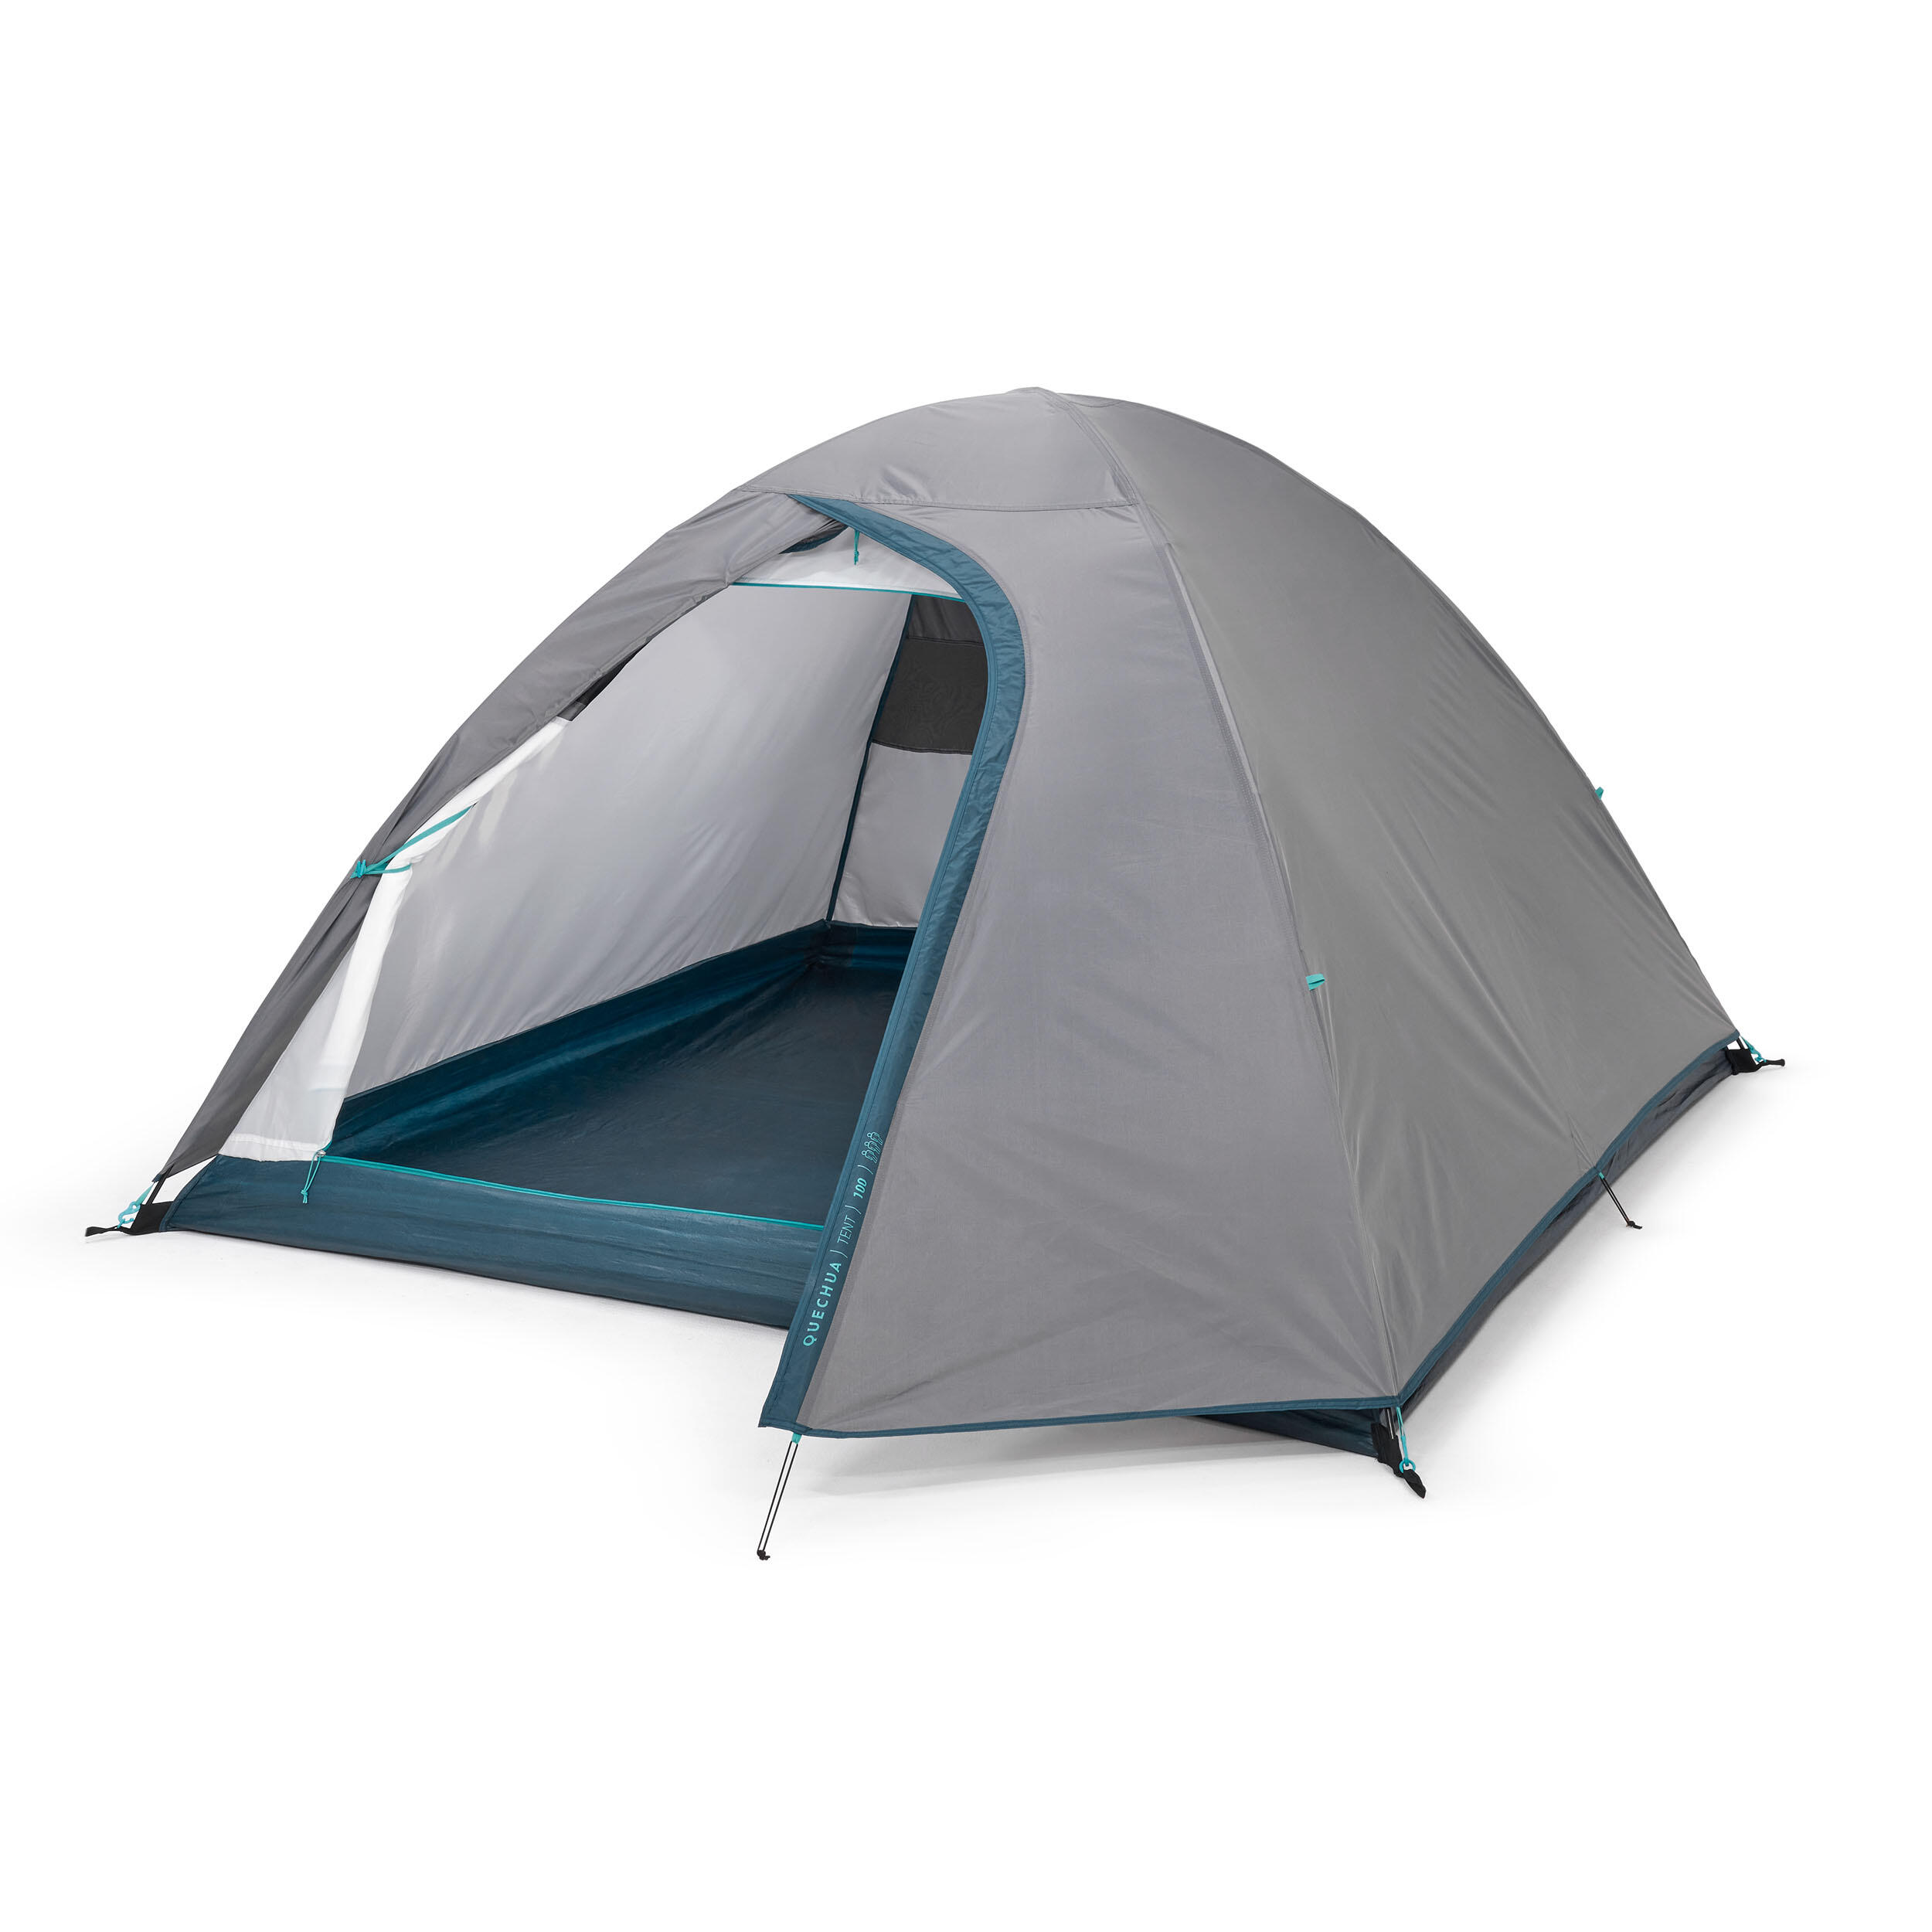 Cort Camping MH100 3 persoane 2-3